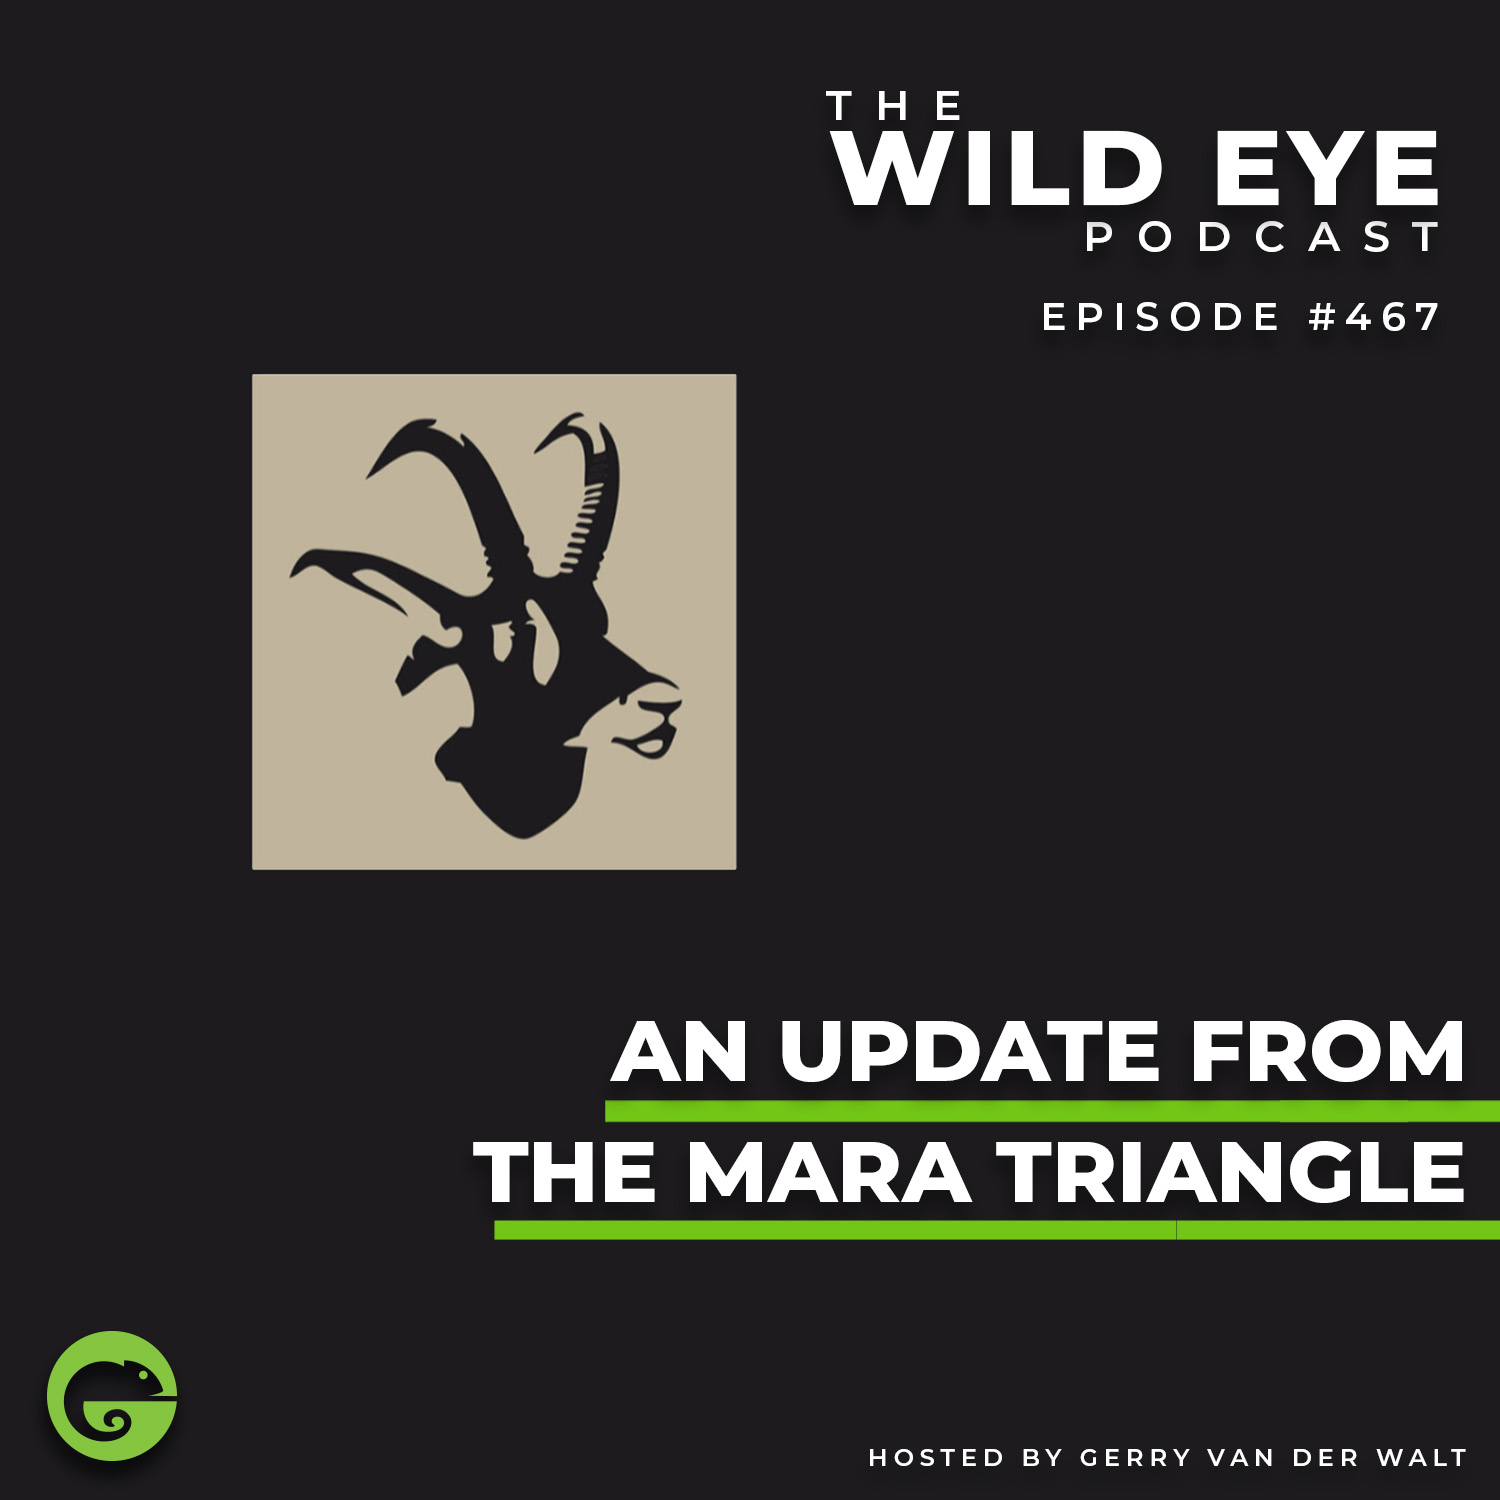 #467 - An update from the Mara Triangle